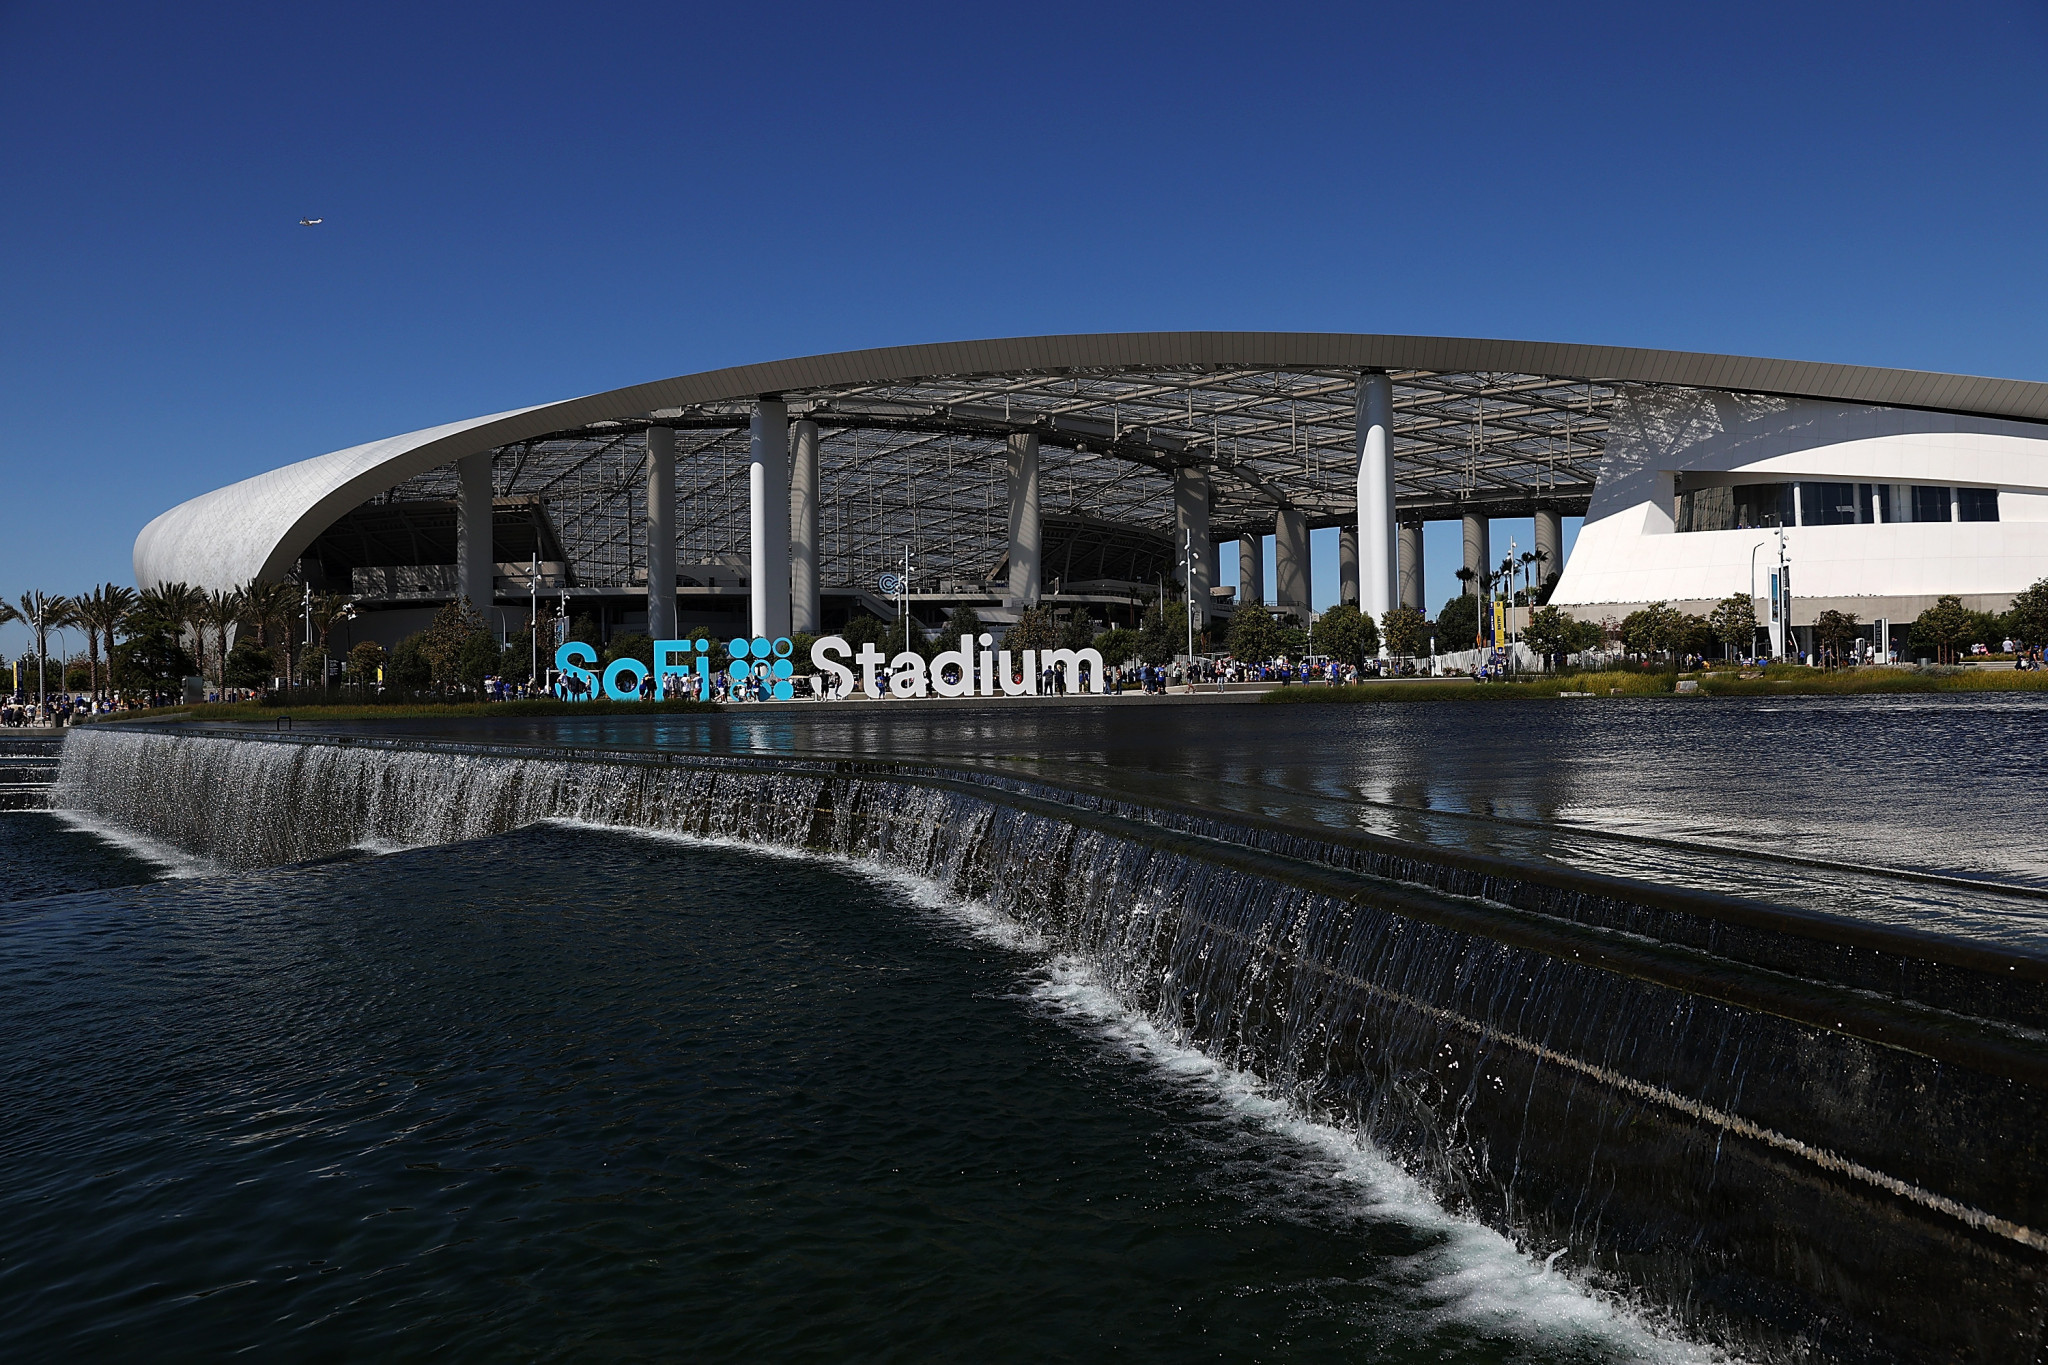 Los Angeles 2028 venue, the SoFi Stadium, is also due to host matches at the 2026 FIFA World Cup ©Getty Images